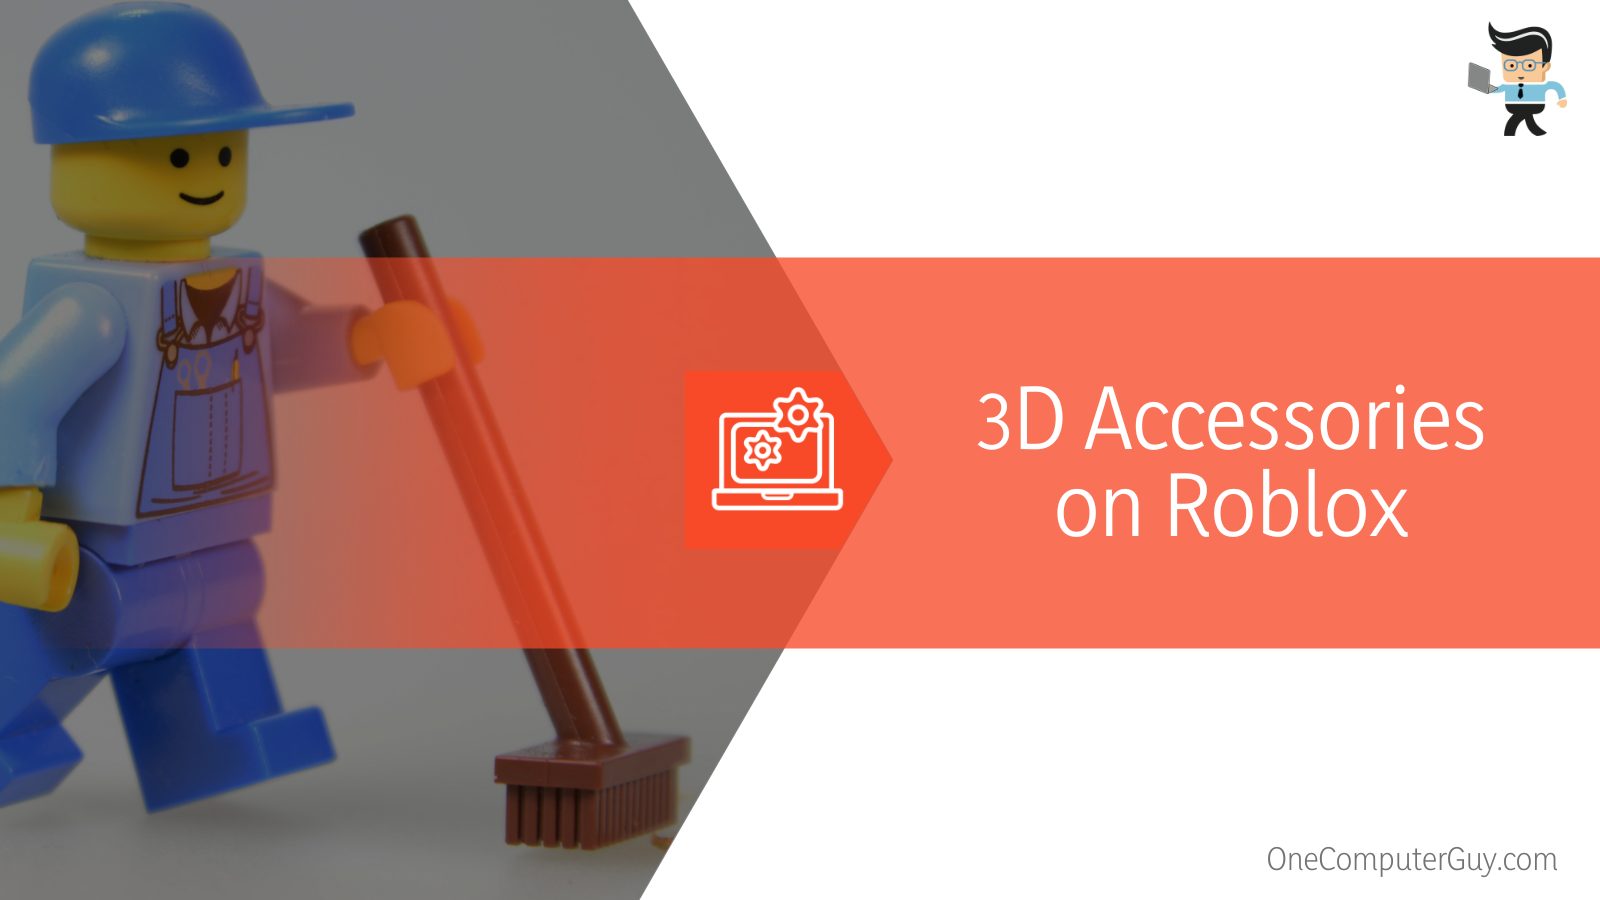 Creating and Submitting 3D Accessories on Roblox